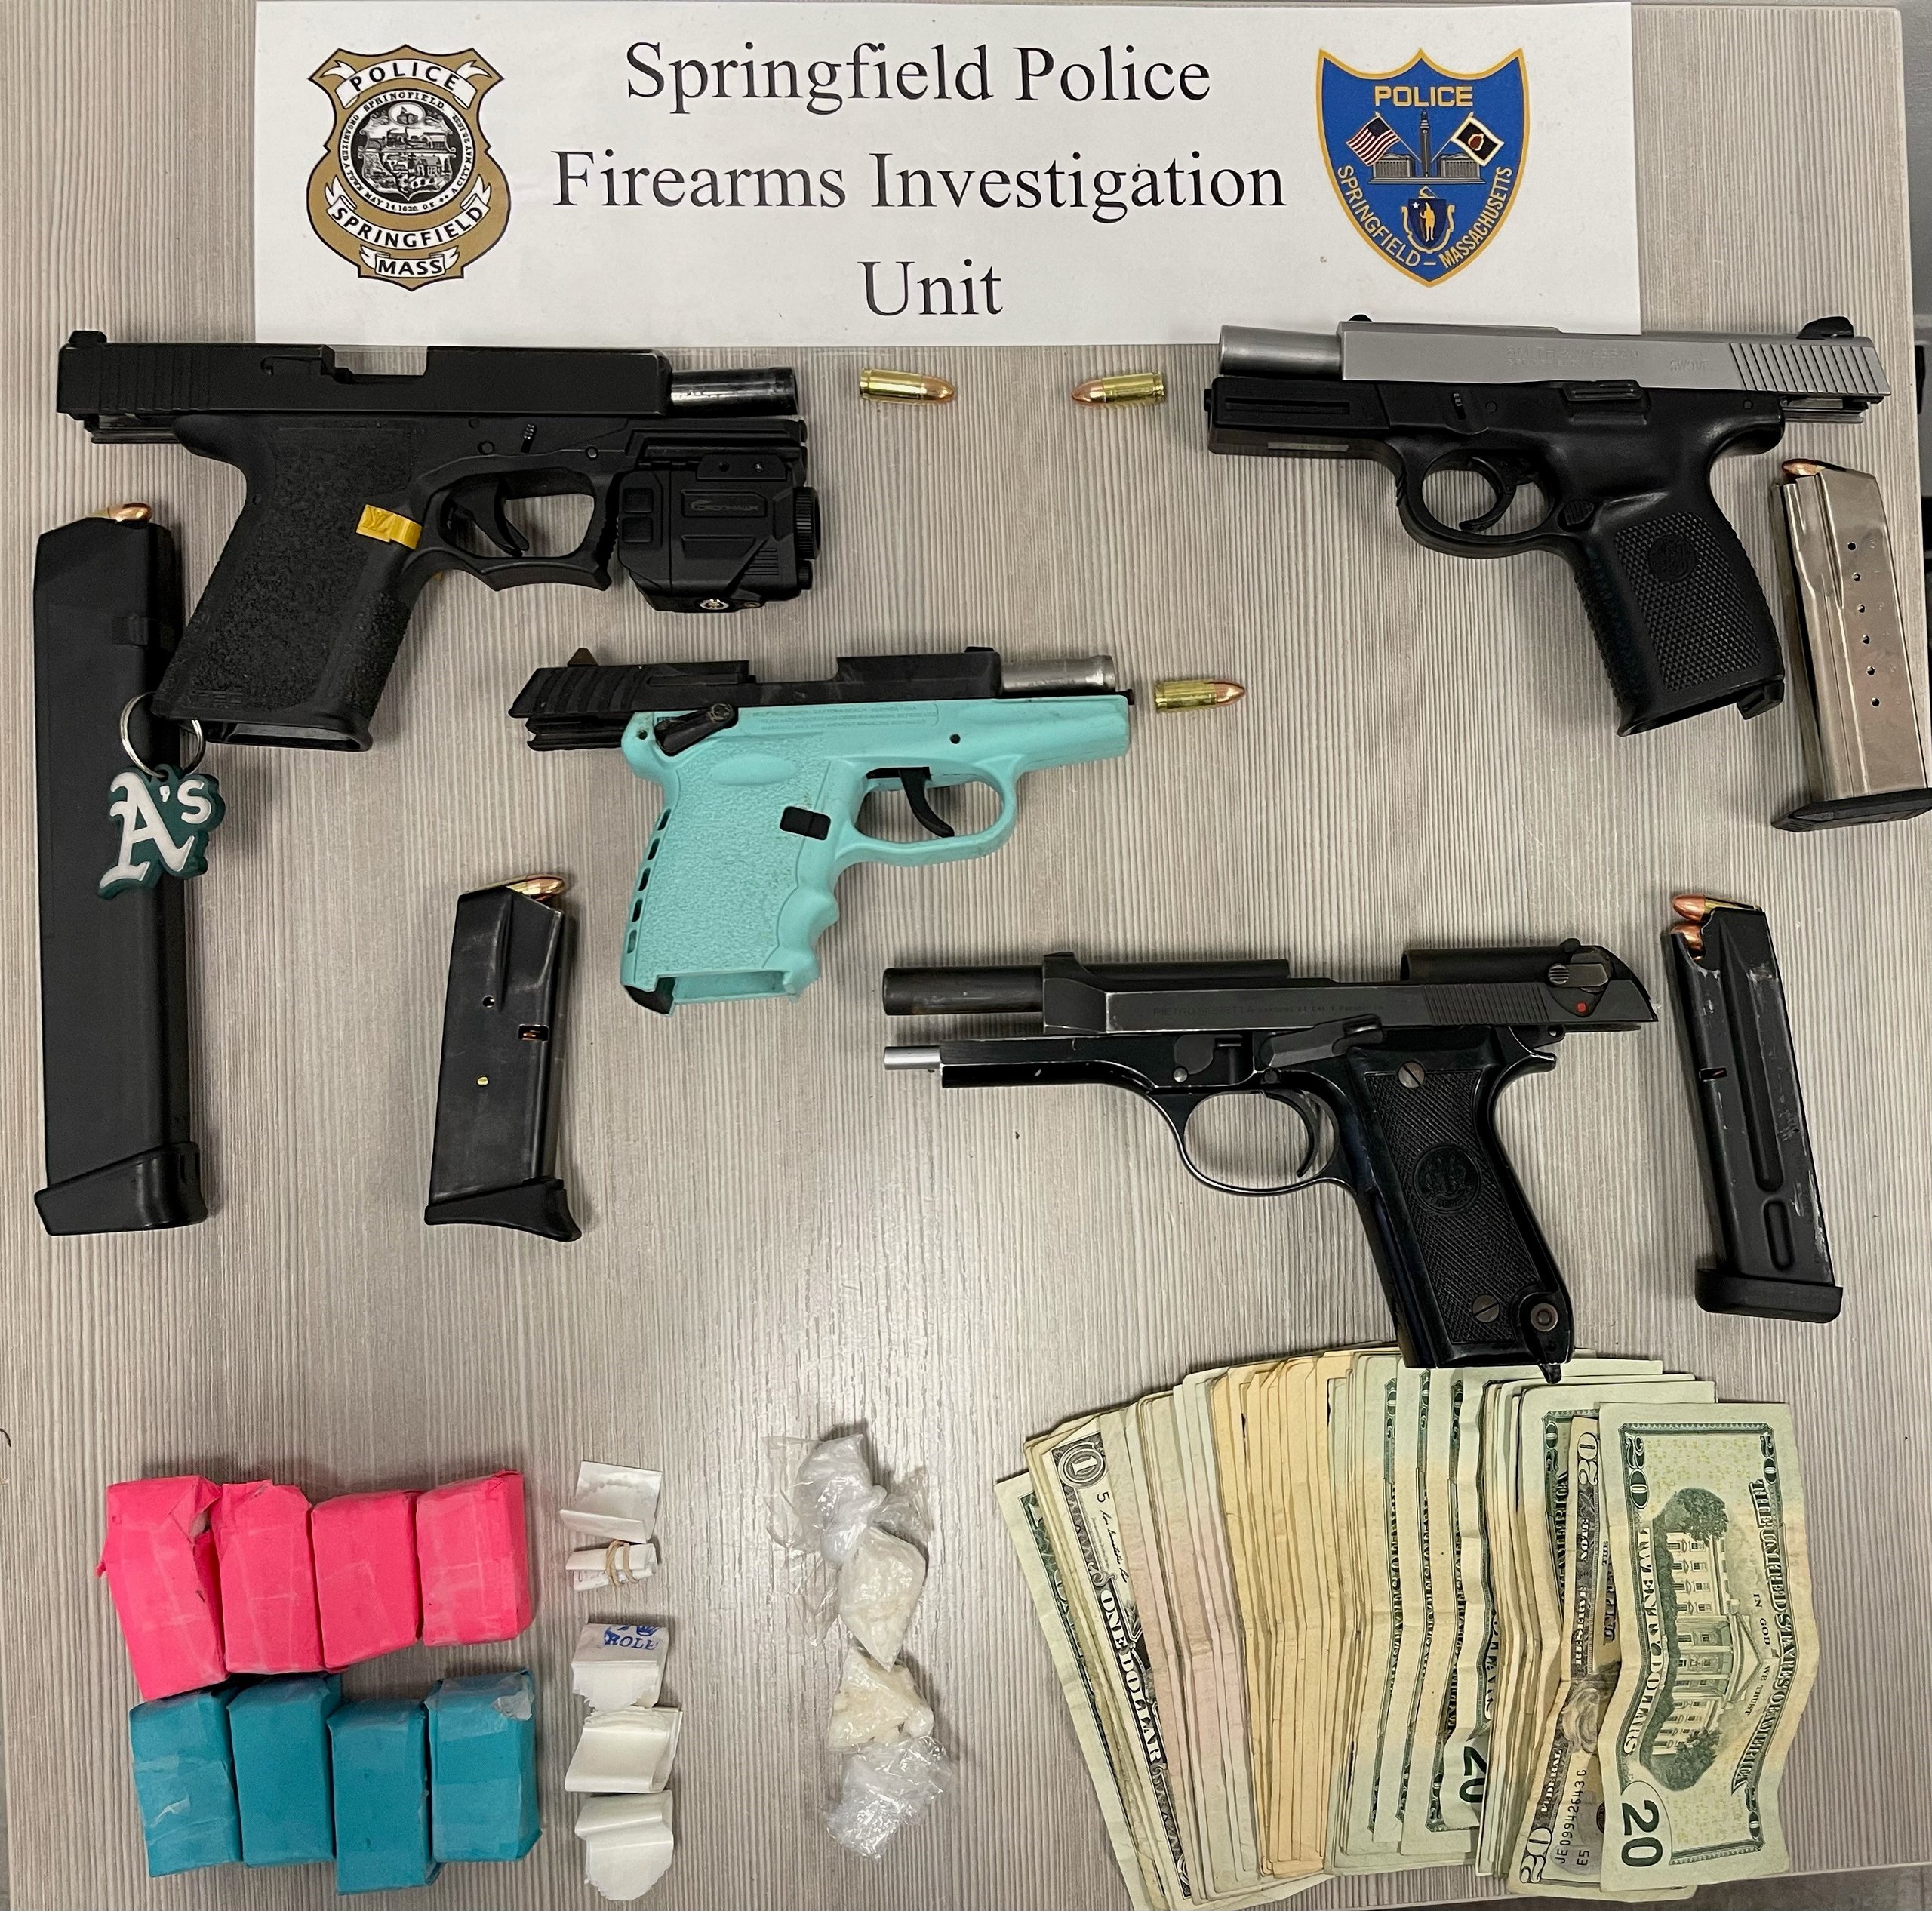 BB guns that look like real firearms seized in Chicopee